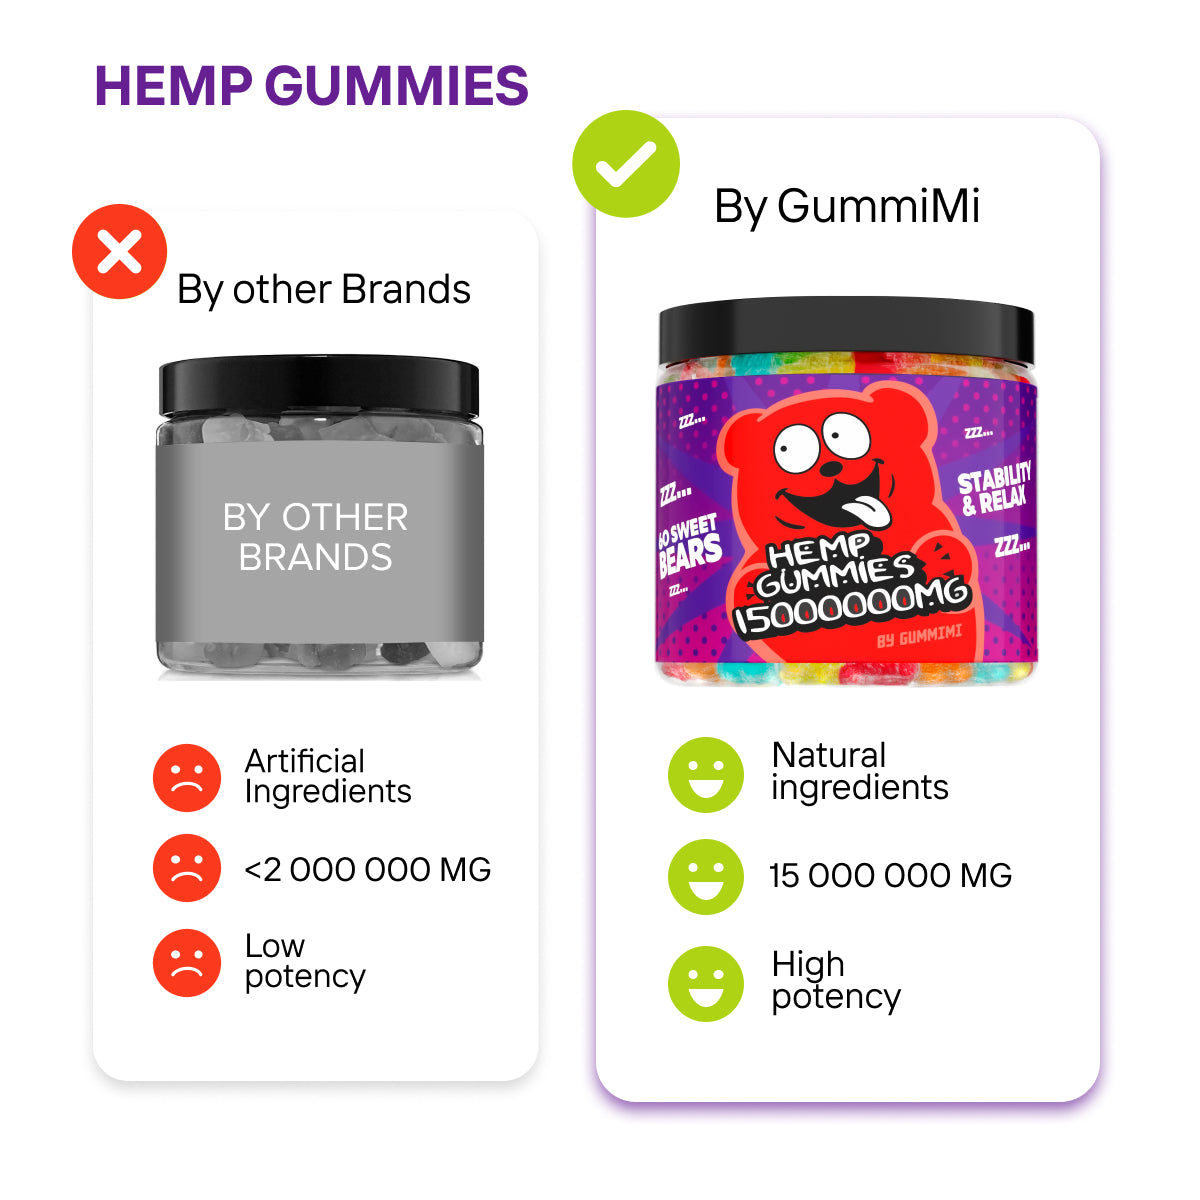 Hеmр Gummies for Joint and Muscle Soreness - 15,000,000 - Restore Healthy Bеdtime, Ensure Peace of Mind and Body with Pure Hеmp Oil Extract and 3 6 9 - Fruity Gummy - Made in USA